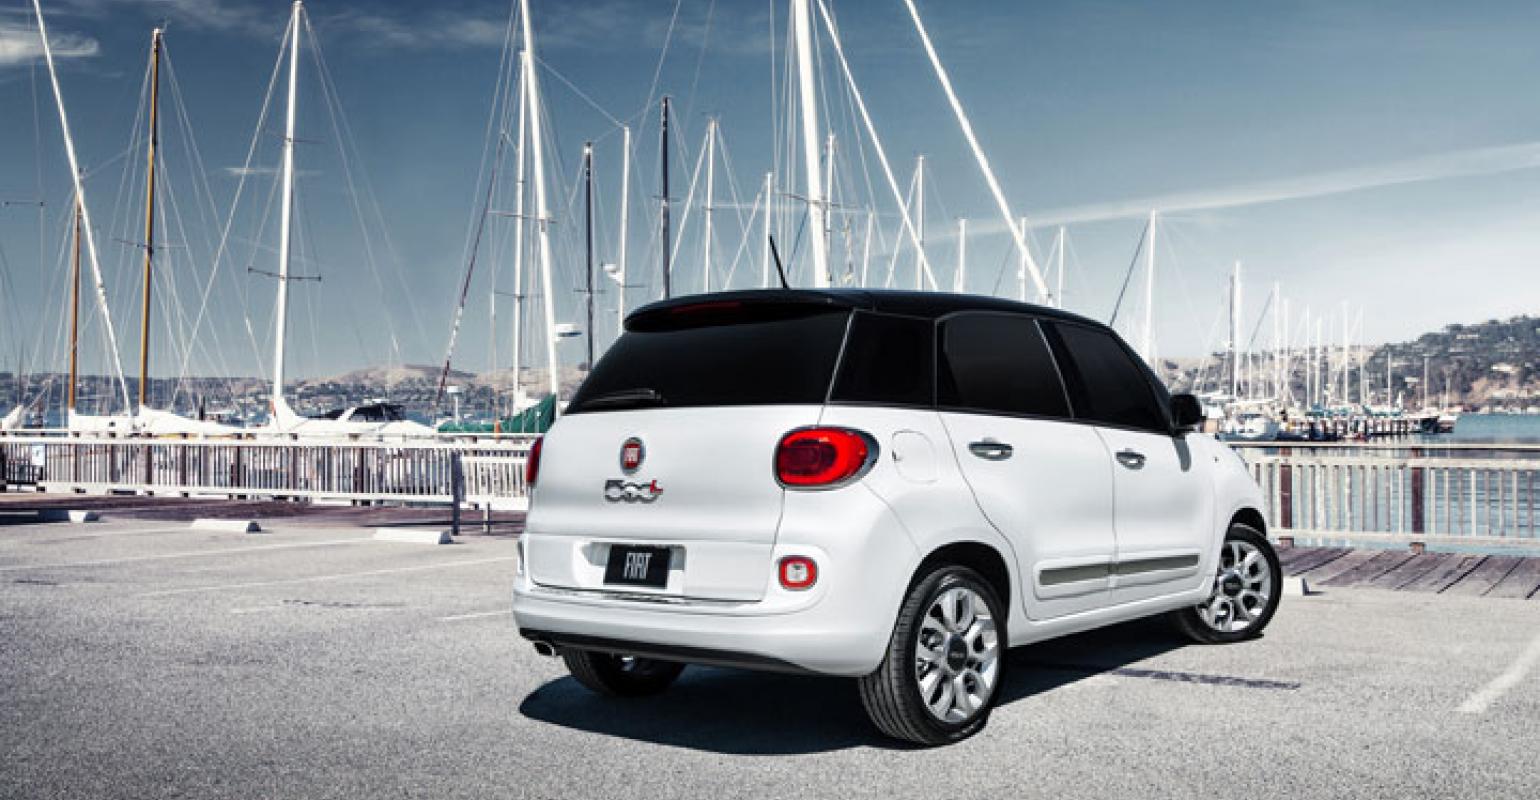 Fiat 500L Trekking review Interior and Driving - Autogefühl Autoblog -  YouTube